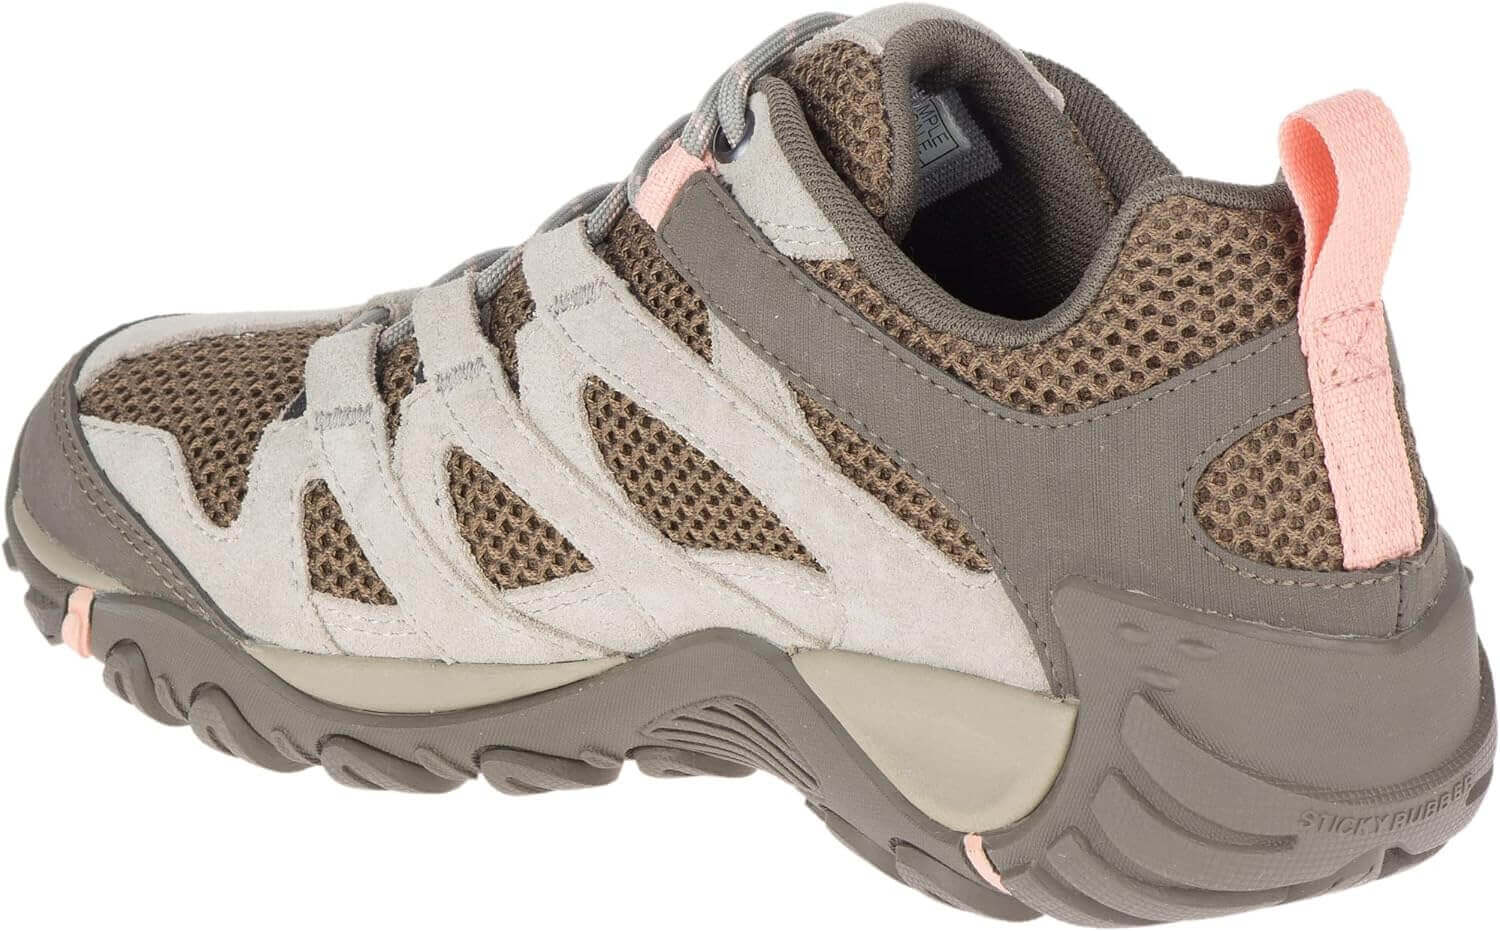 Shop The Latest >Merrell Women's Alverstone Hiking Shoe > *Only $56.70*> From The Top Brand > *Merrelll* > Shop Now and Get Free Shipping On Orders Over $45.00 >*Shop Earth Foot*